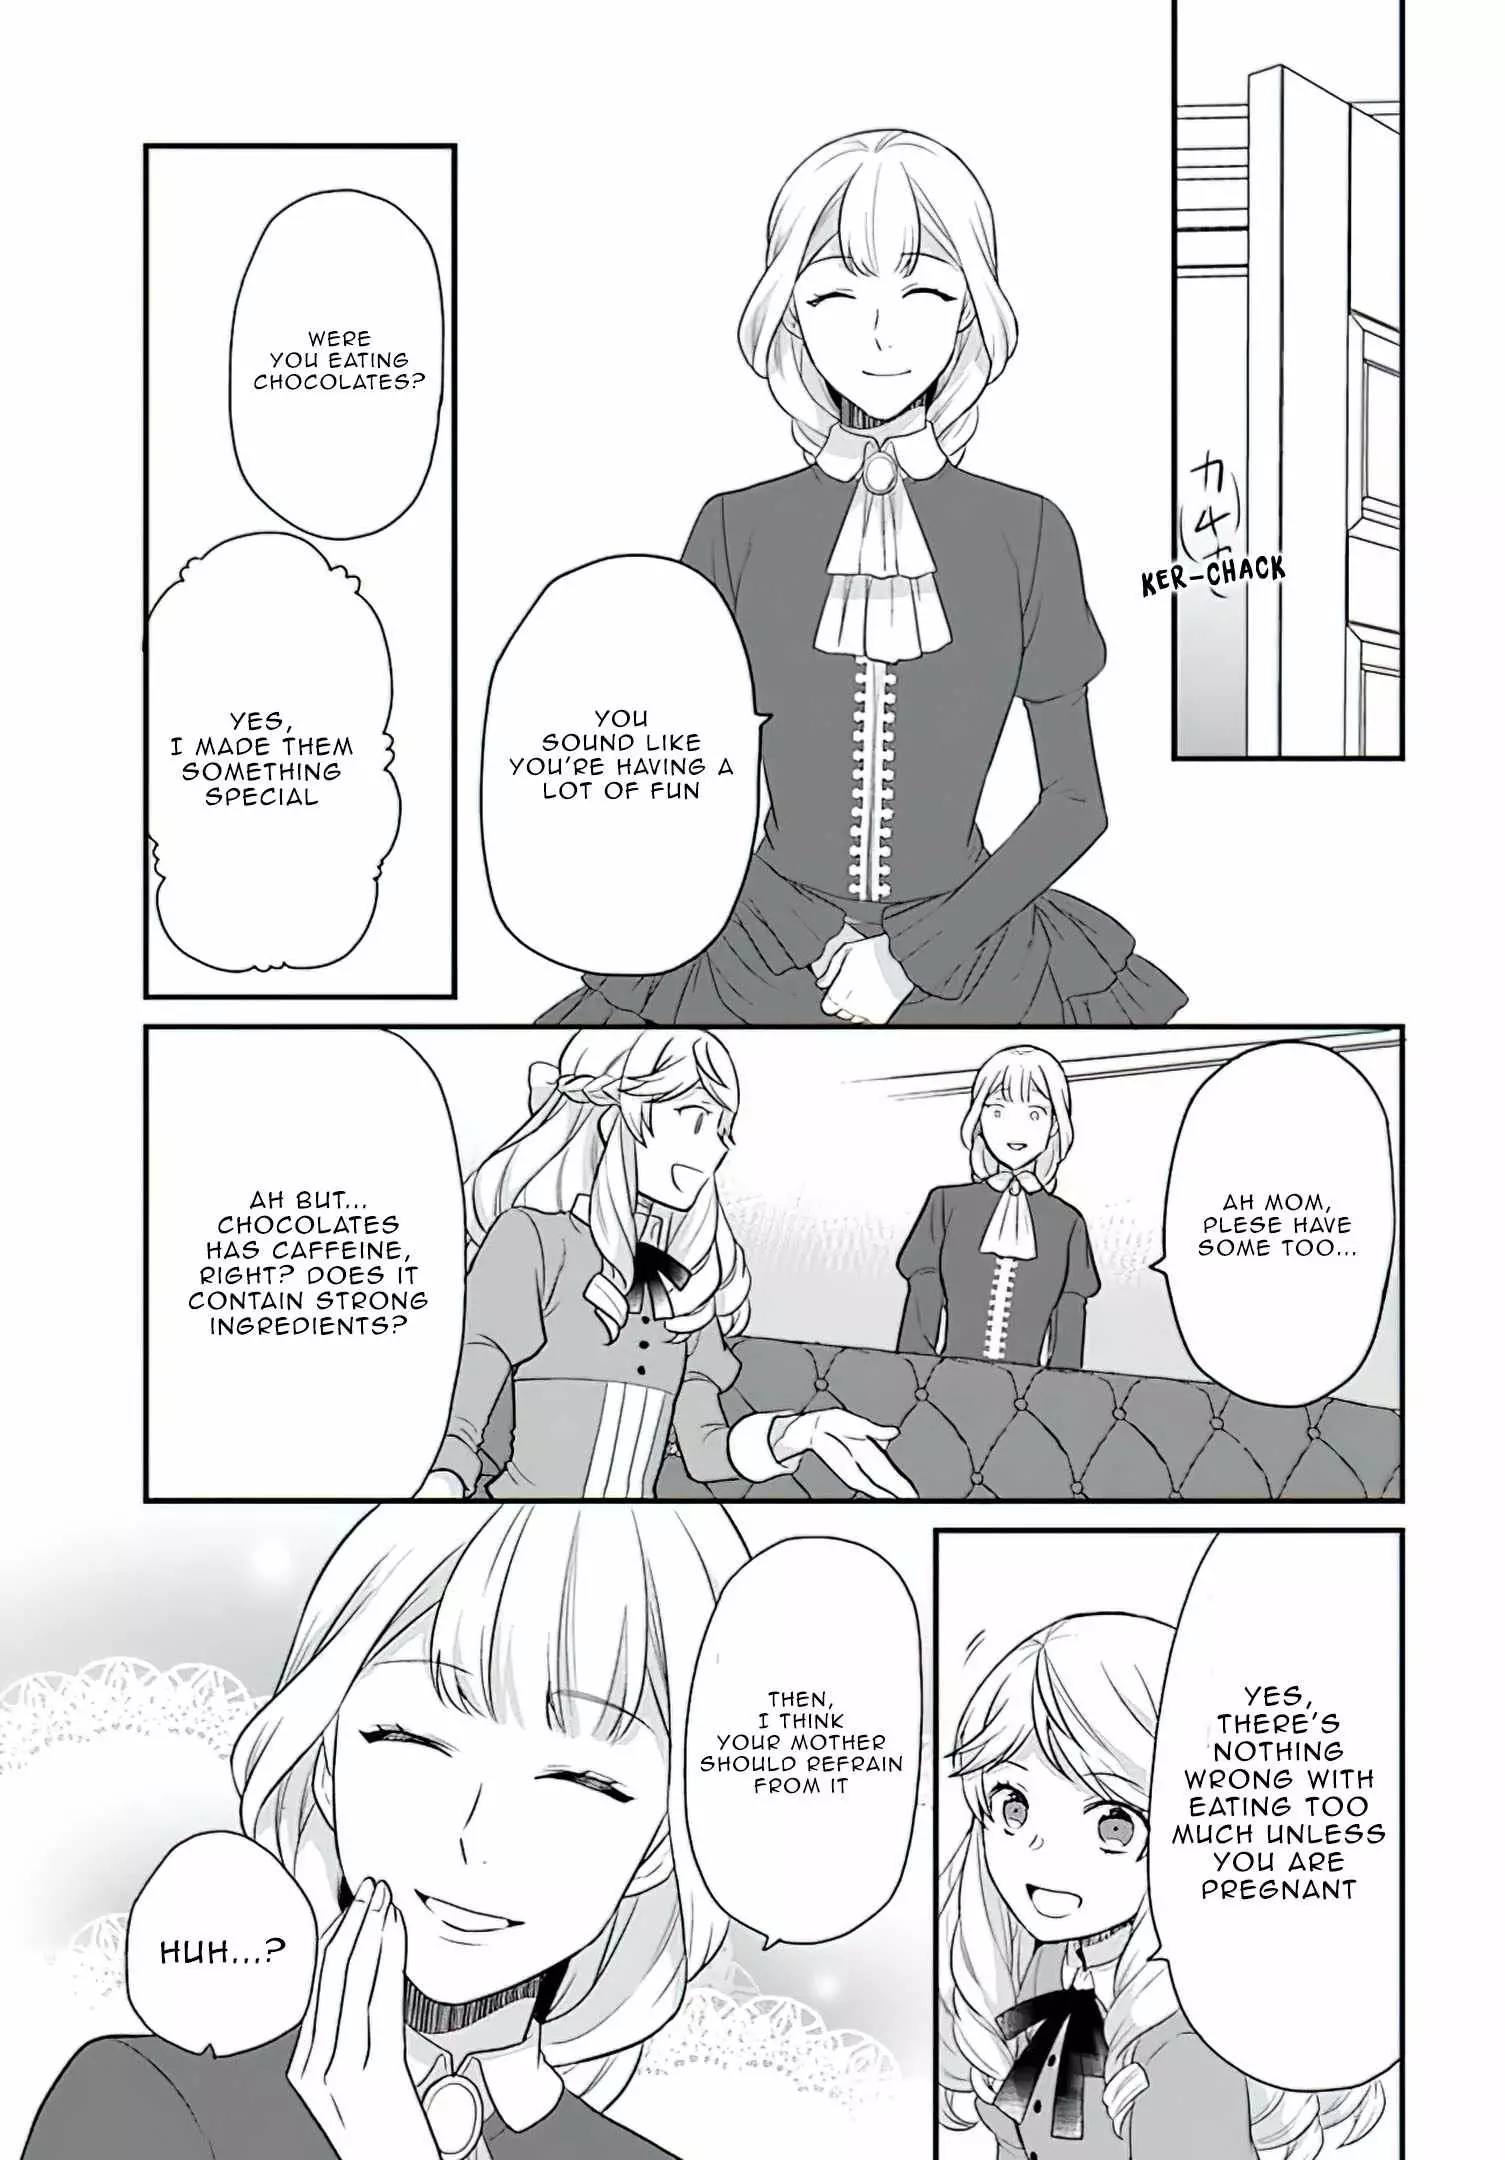 Because Of Her Love For Sake, The Otome Game Setting Was Broken And The Villainous Noblewoman Became The Noblewoman With Cheats - 19 page 28-19f8e91f